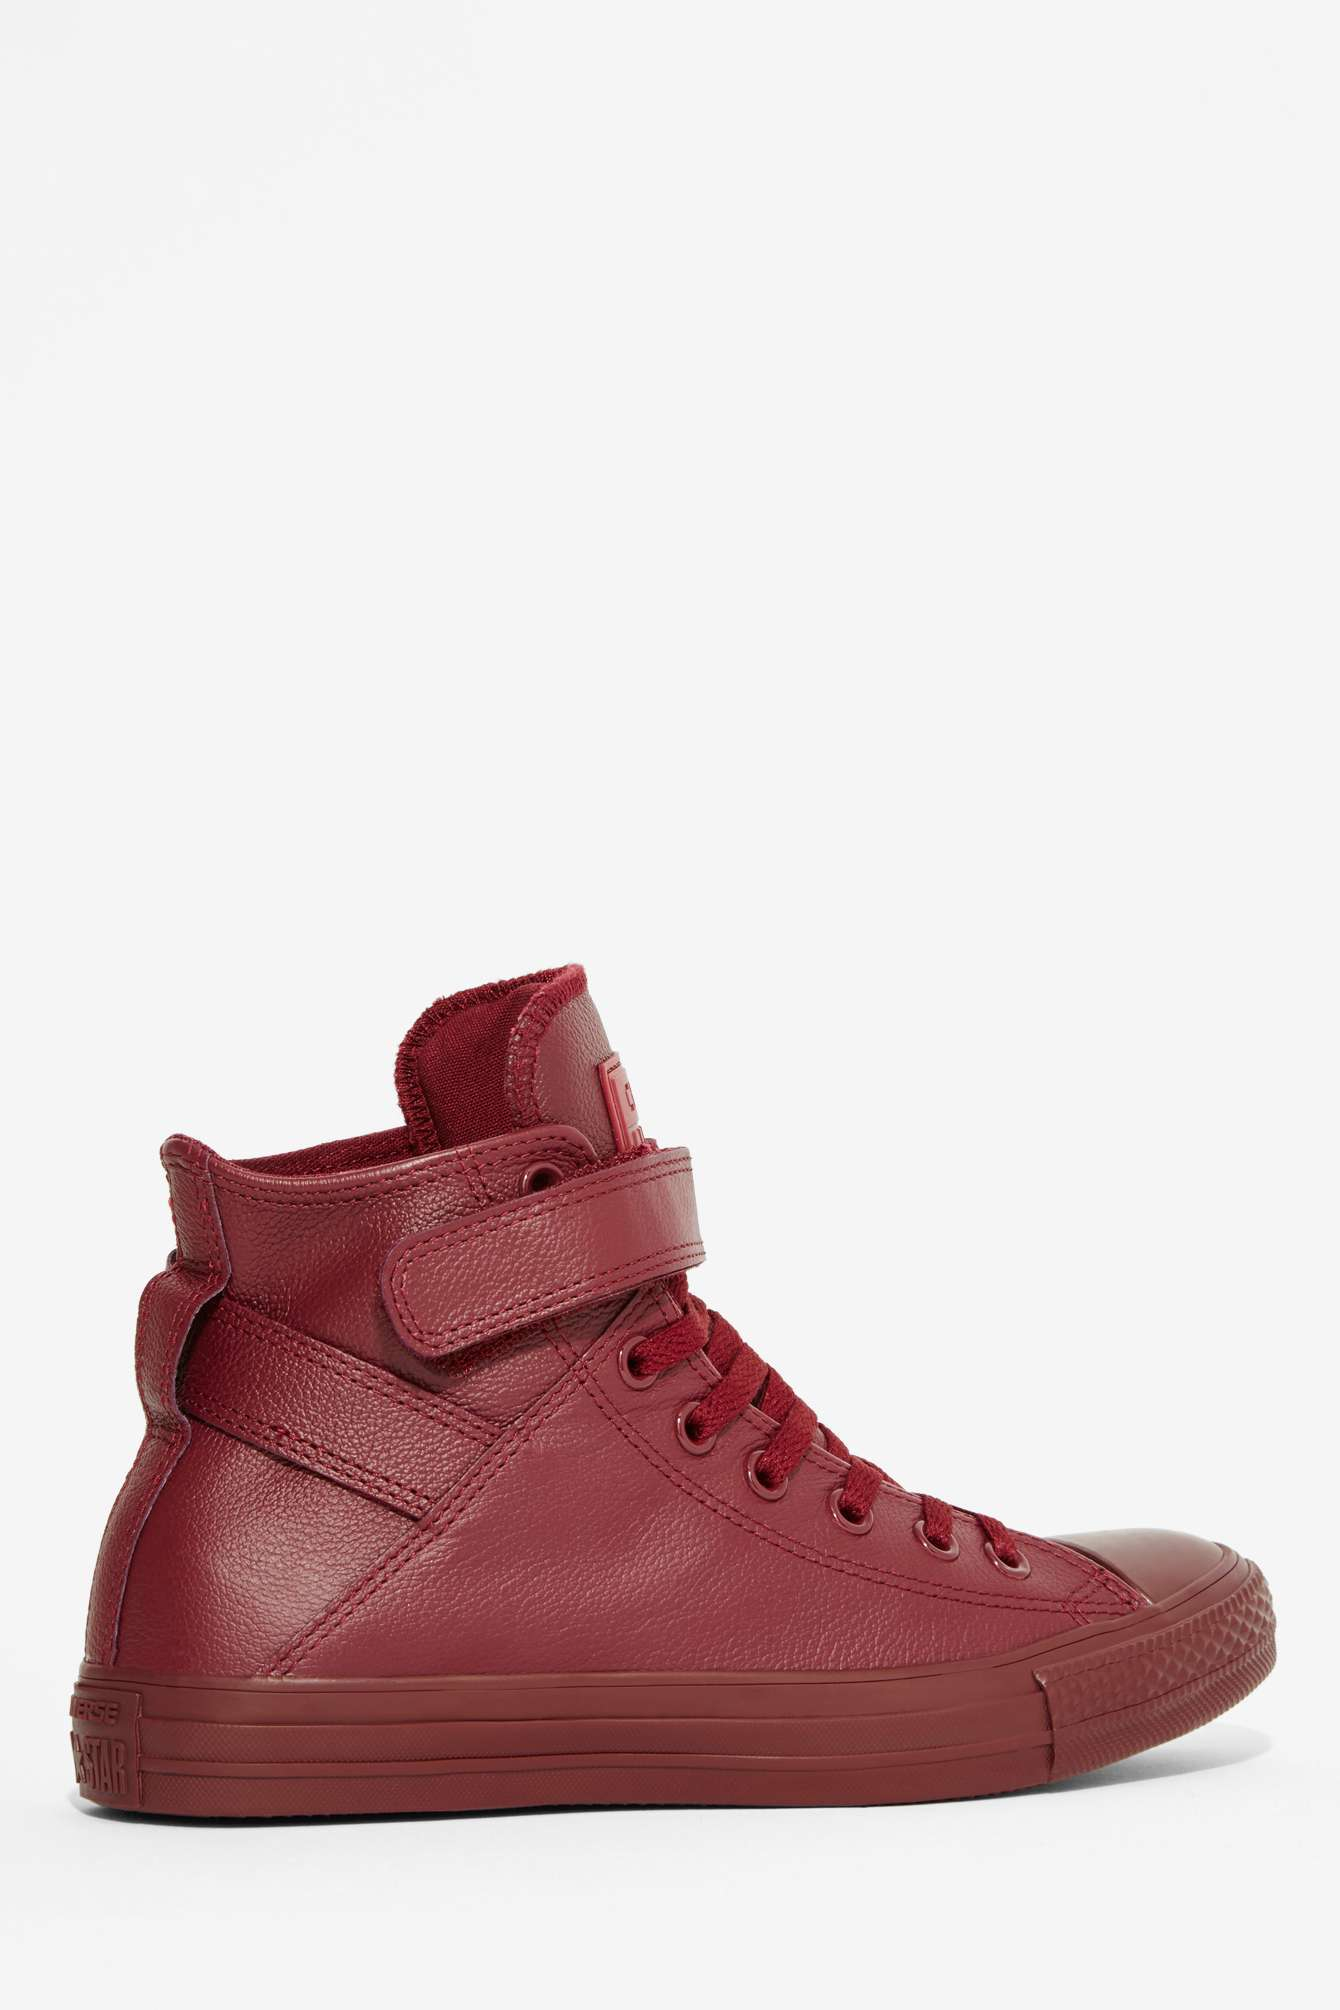 Converse Chuck Taylor Brea Leather Sneaker - Burgundy in Red | Lyst